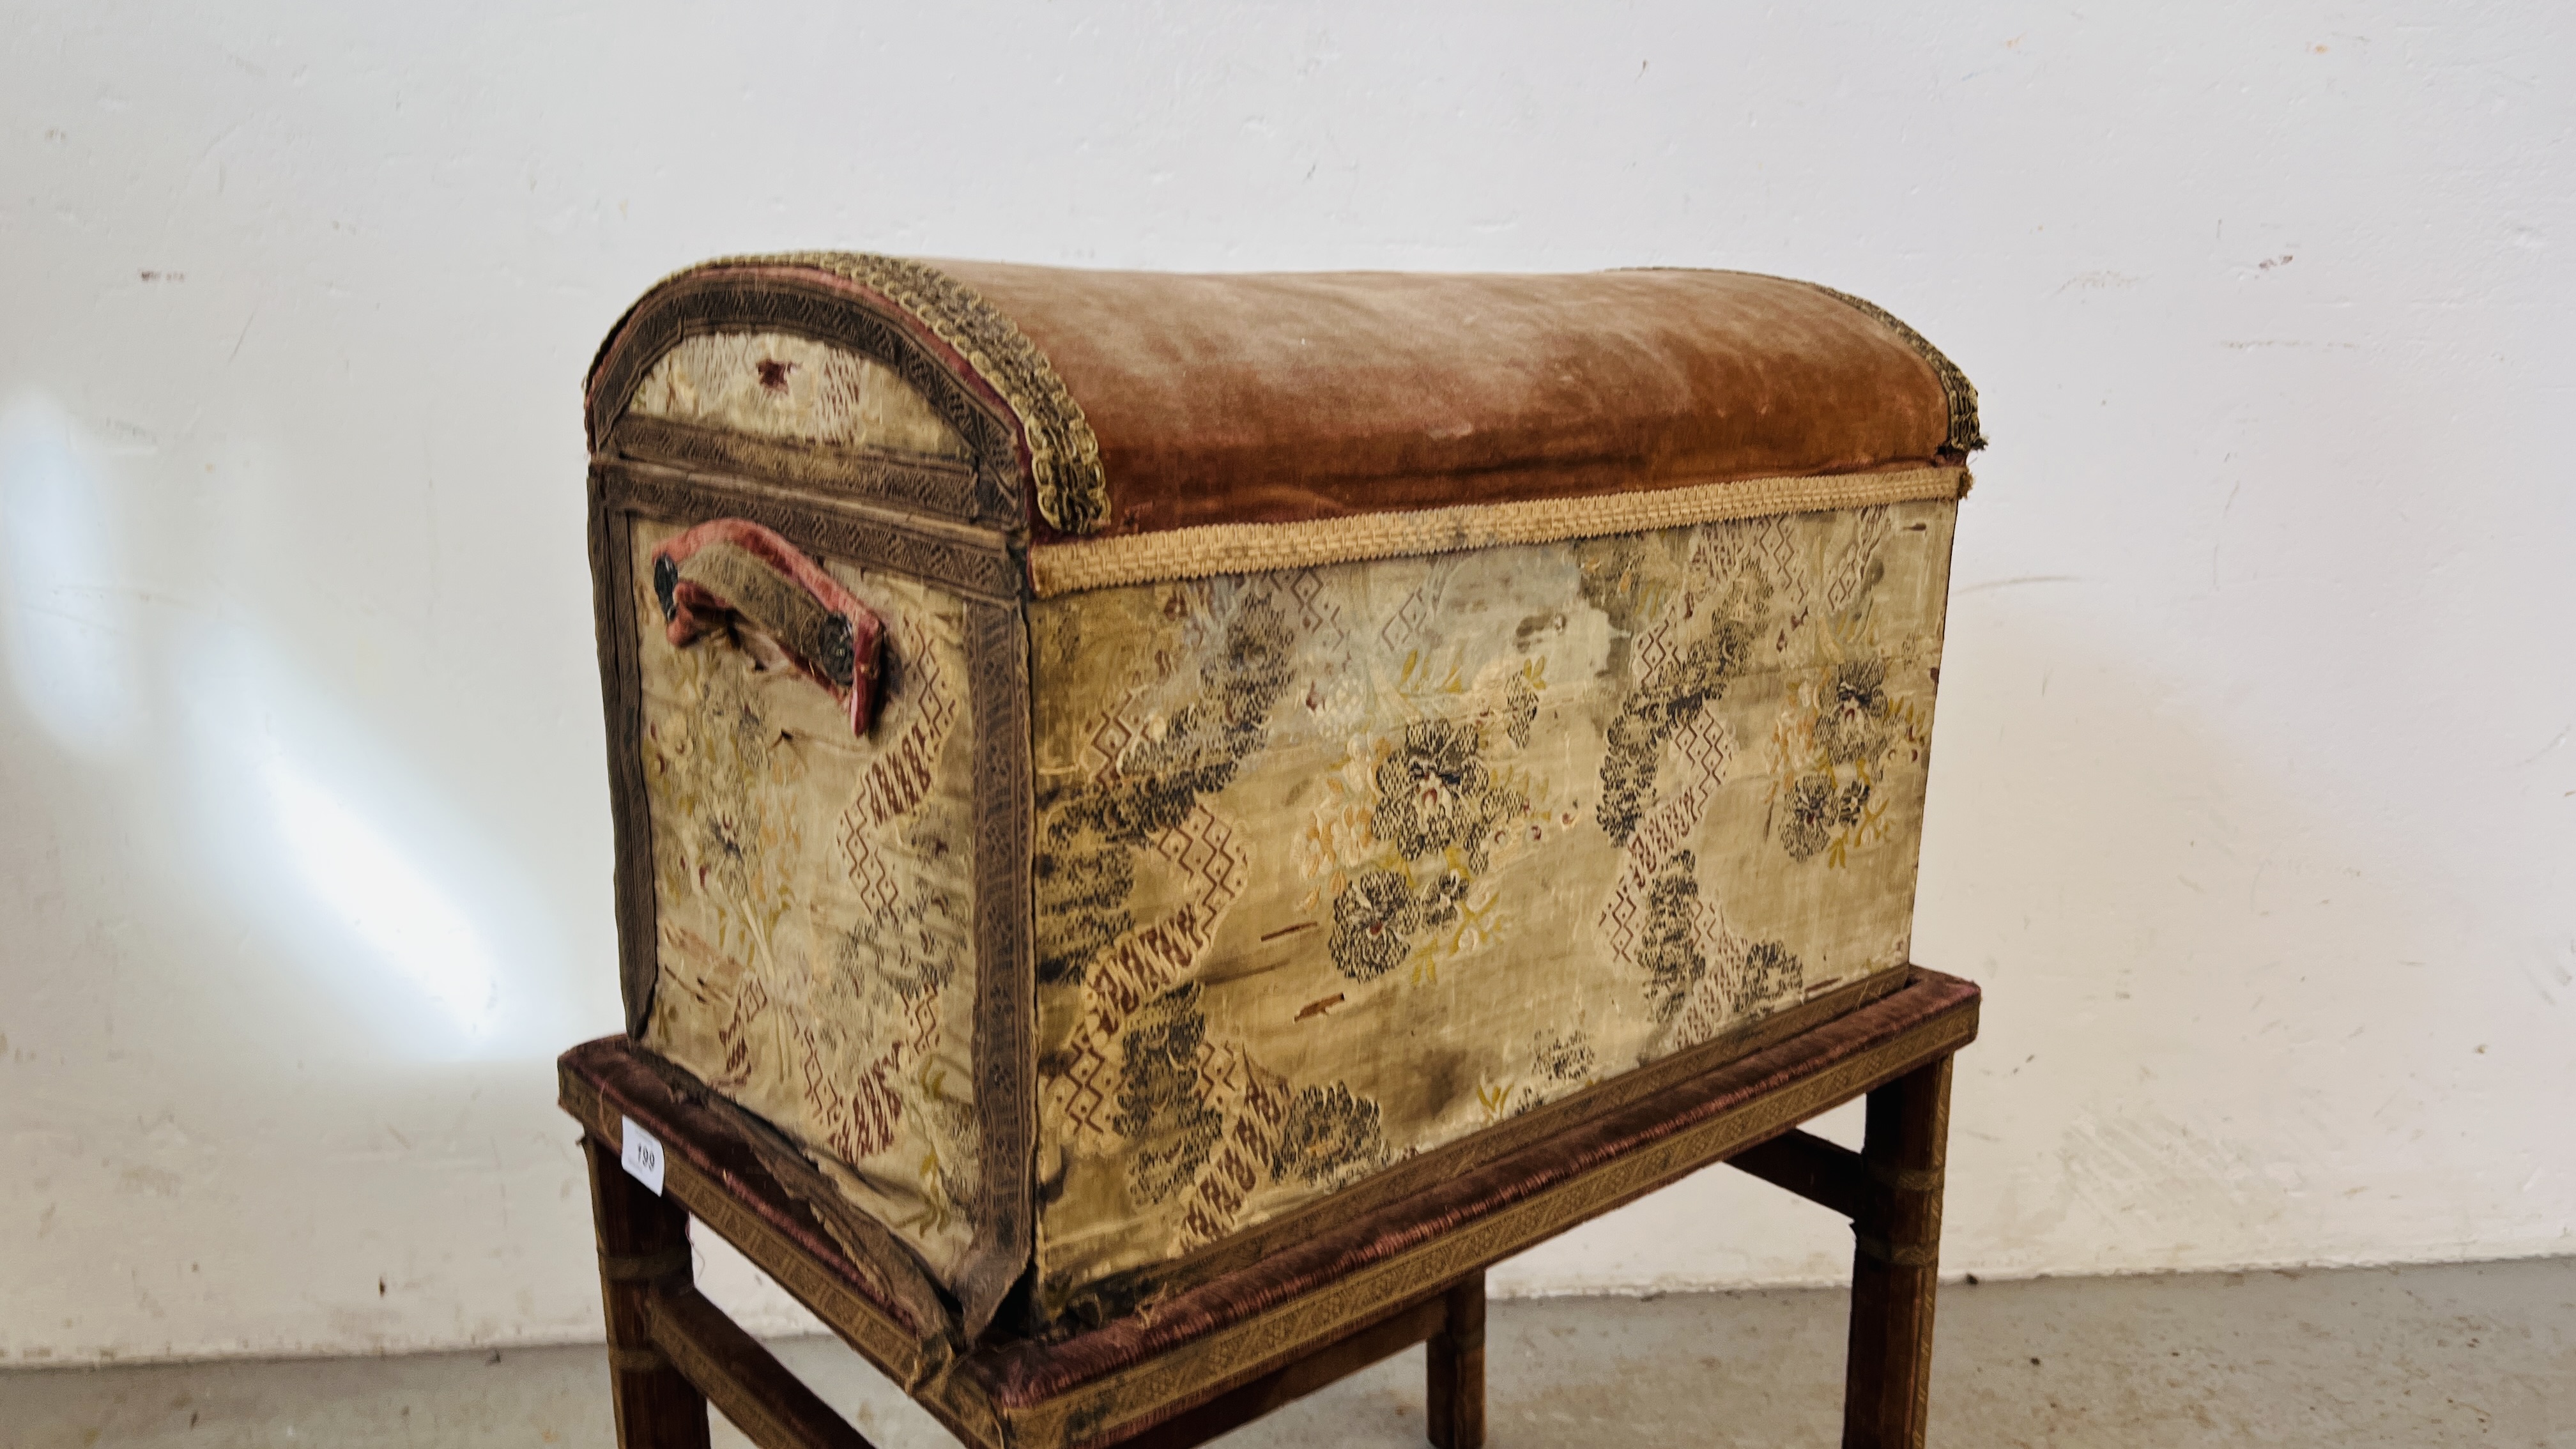 A VELVET COVERED DOME TOP TREASURY TRUNK ON STAND (BOX W 53CM. D 33CM. - Image 2 of 11